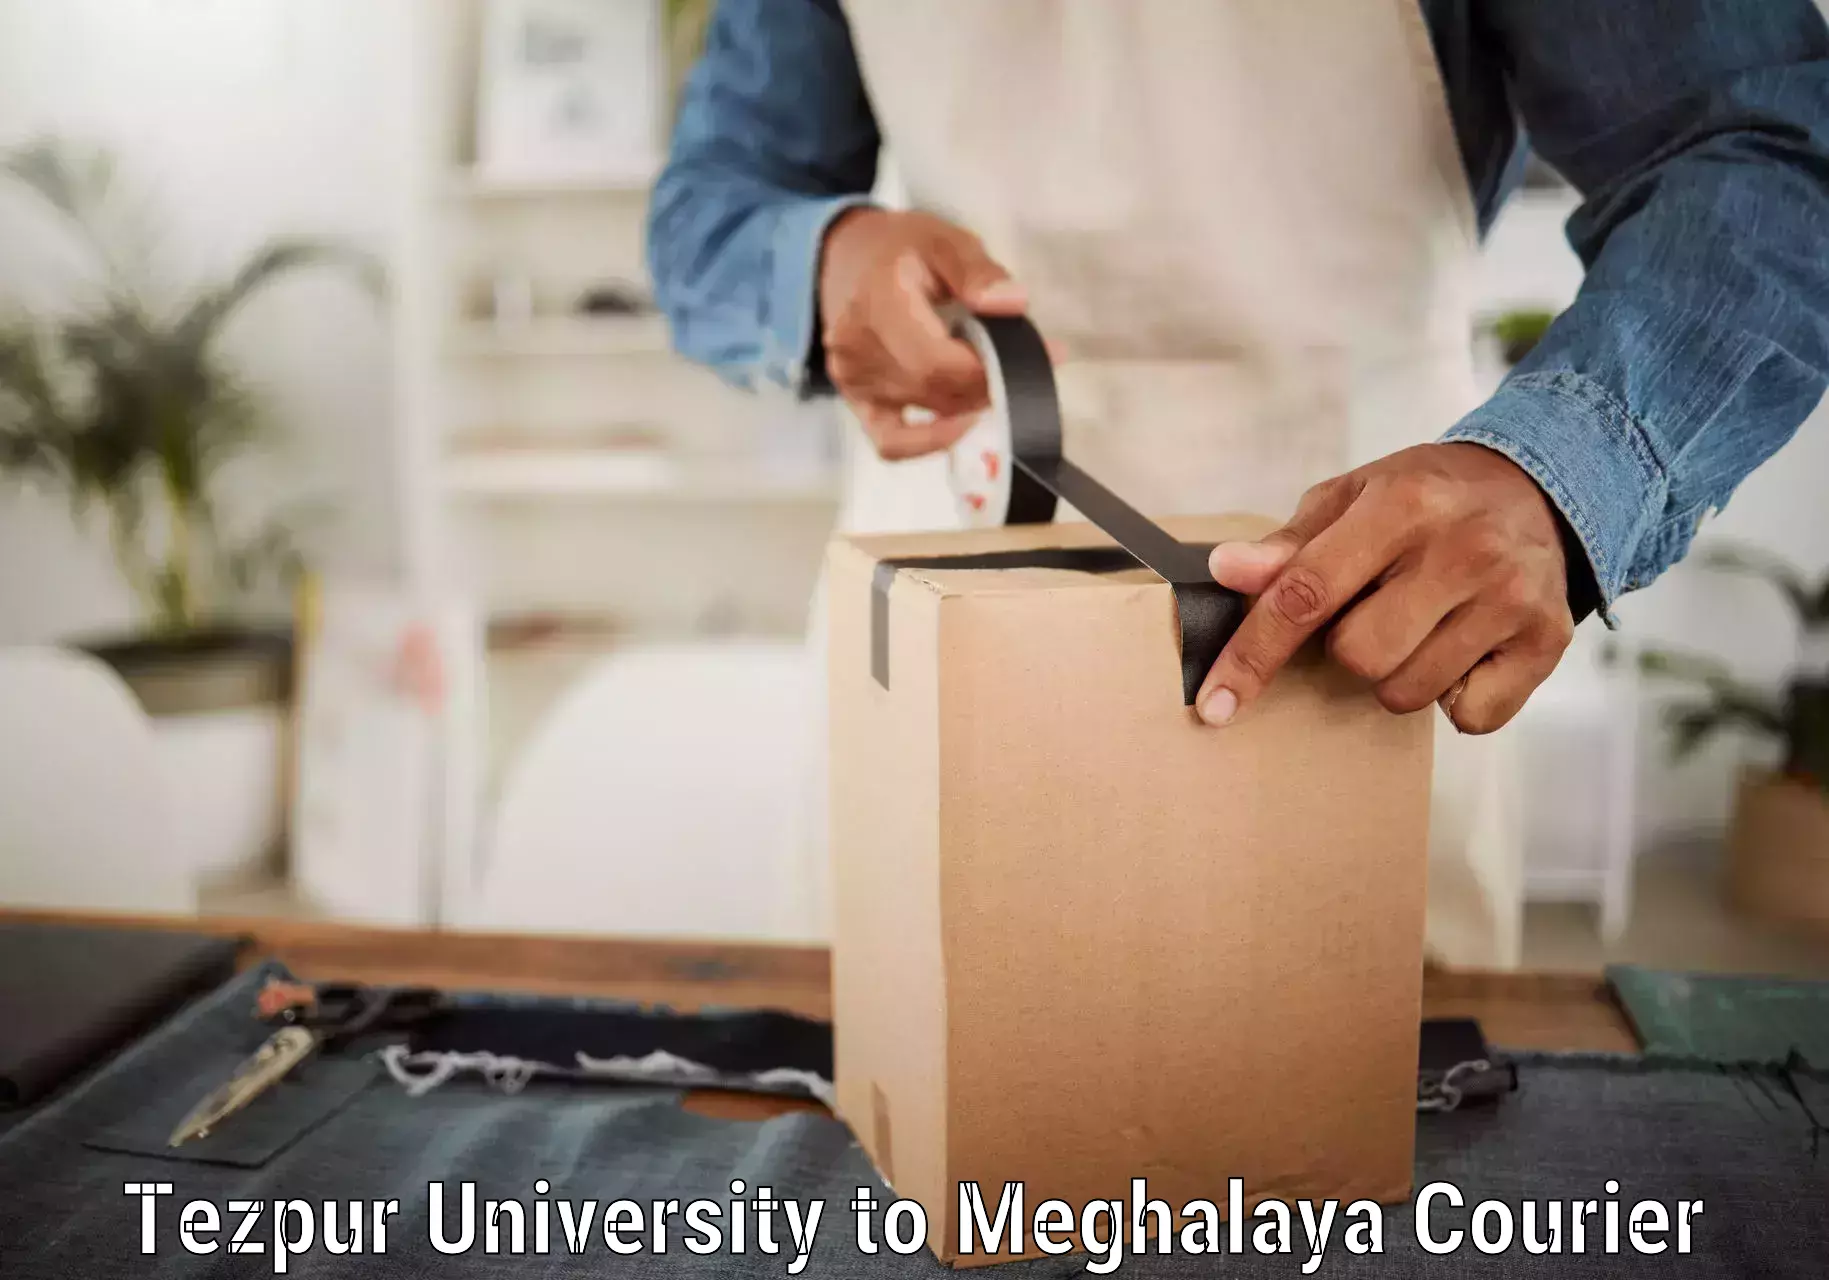 Bulk courier orders in Tezpur University to Tura